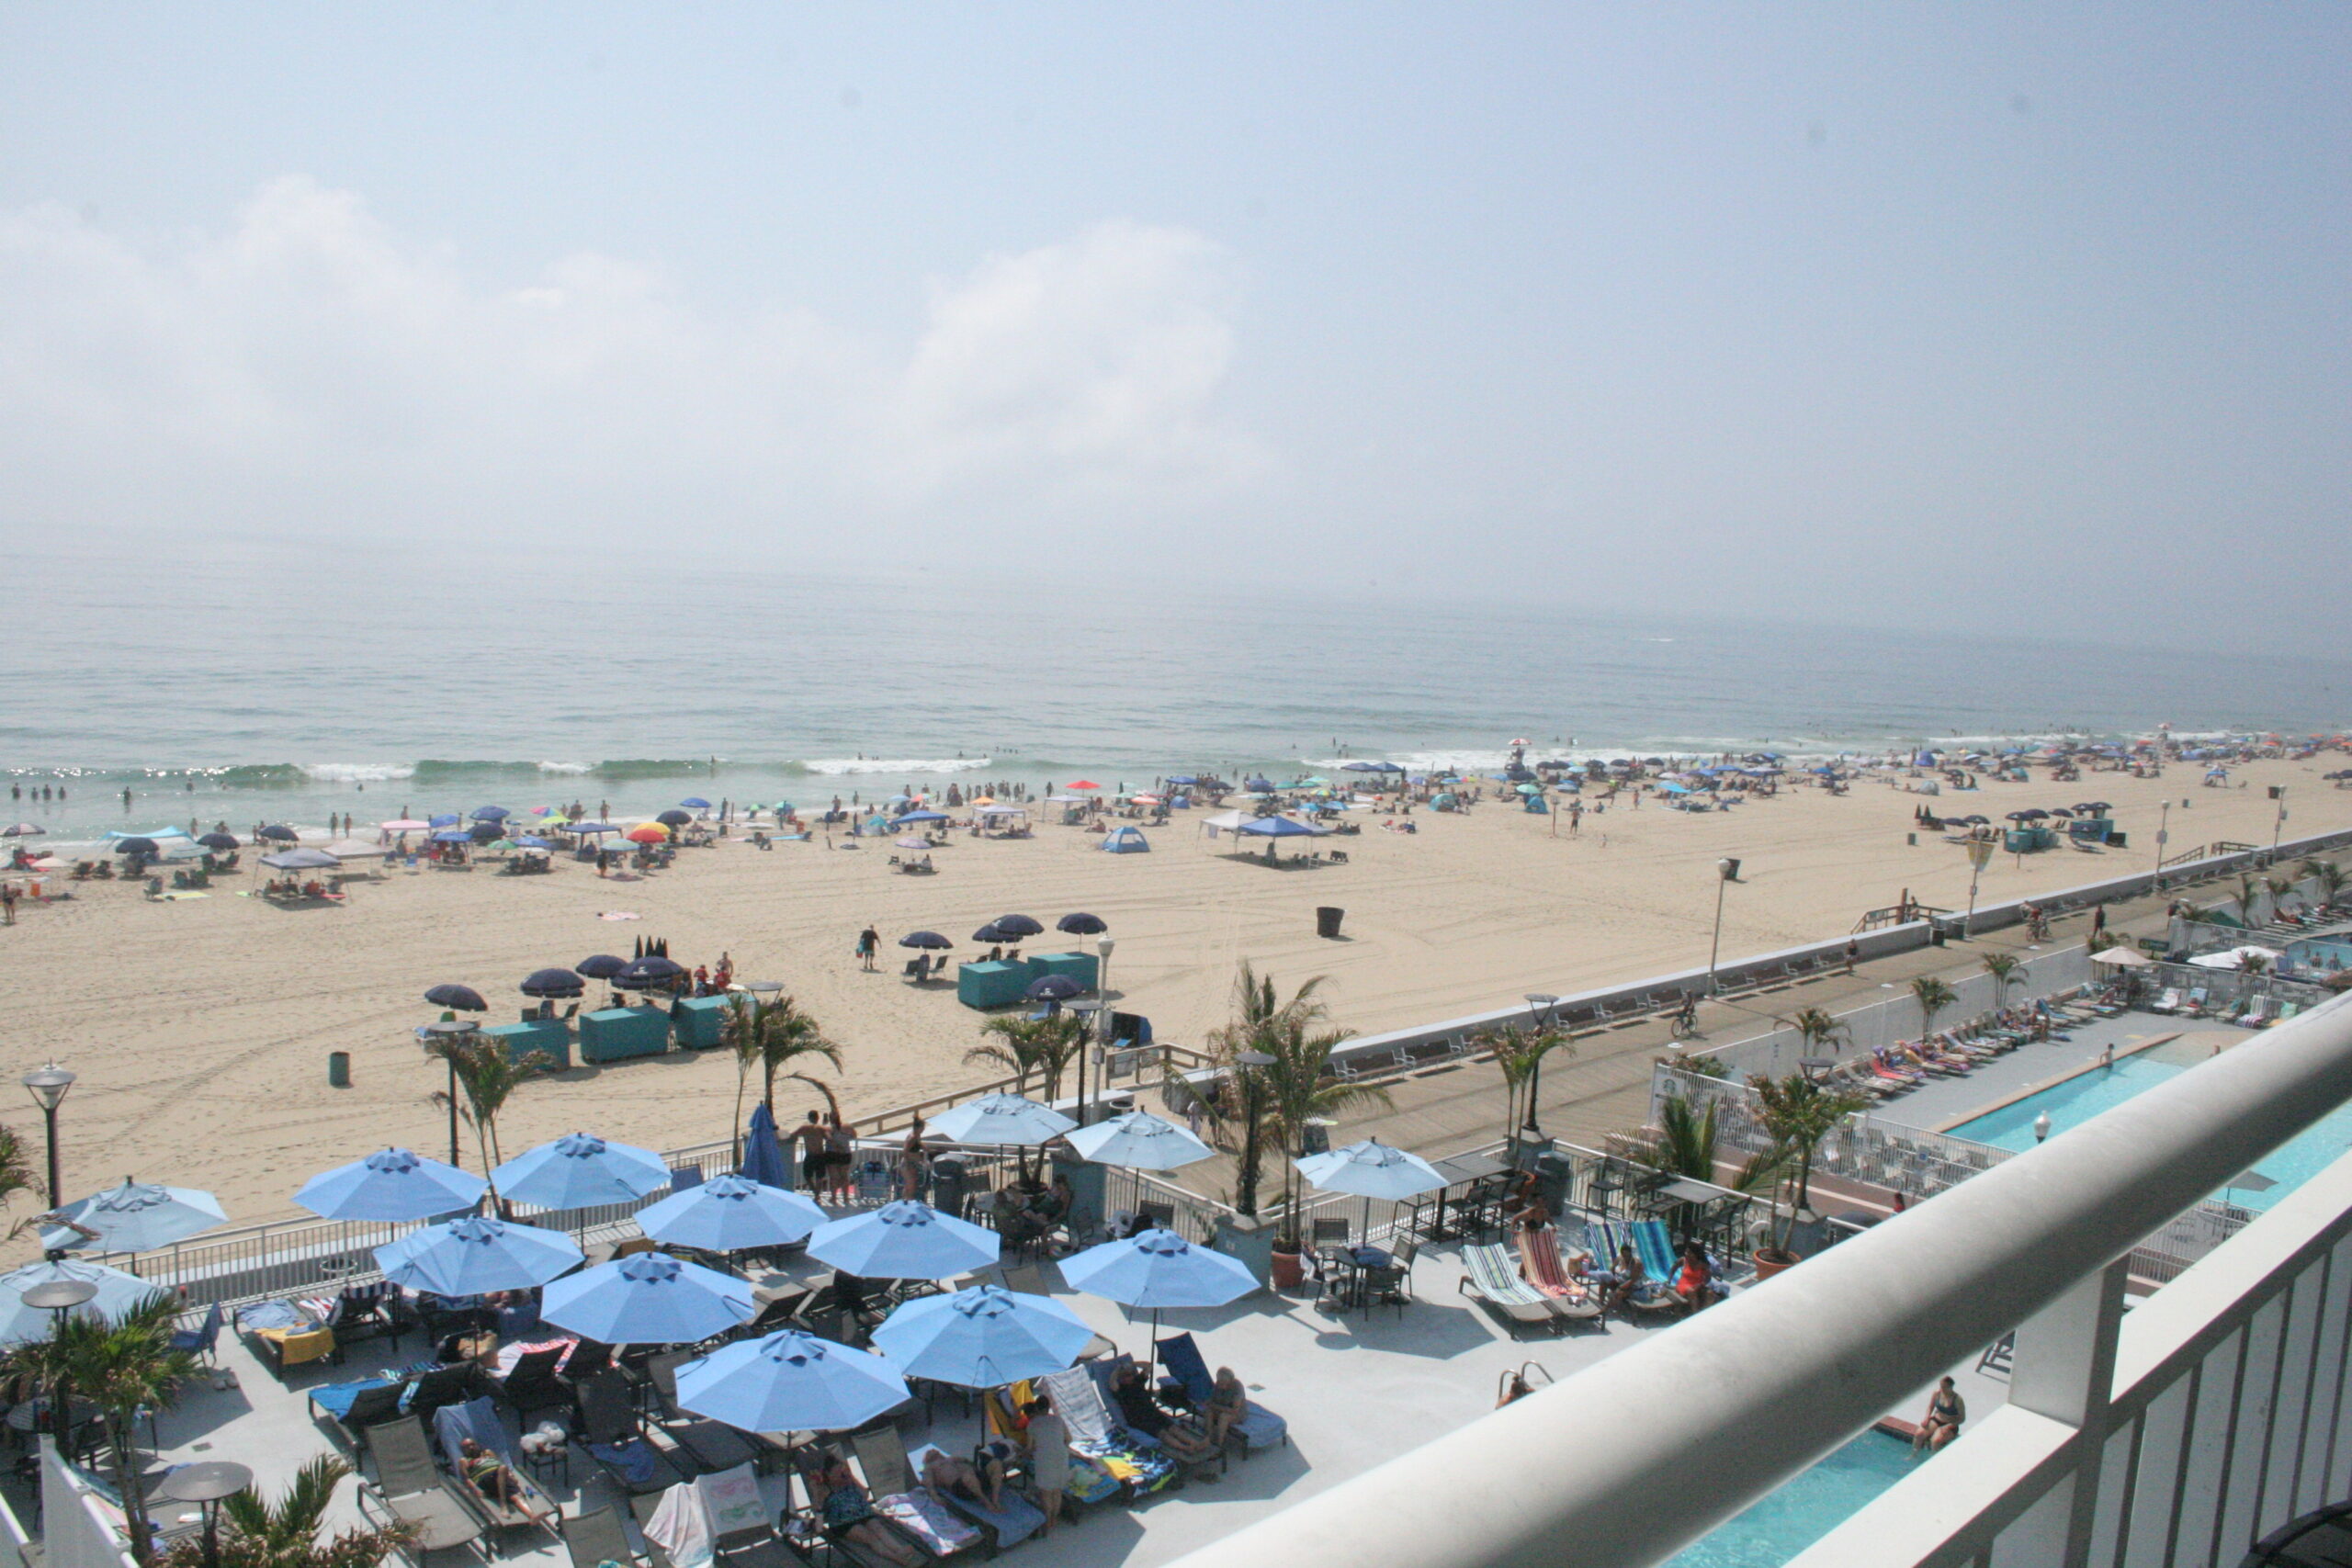 Ocean City Named One of Best Beaches in the USA by TripAdvisor